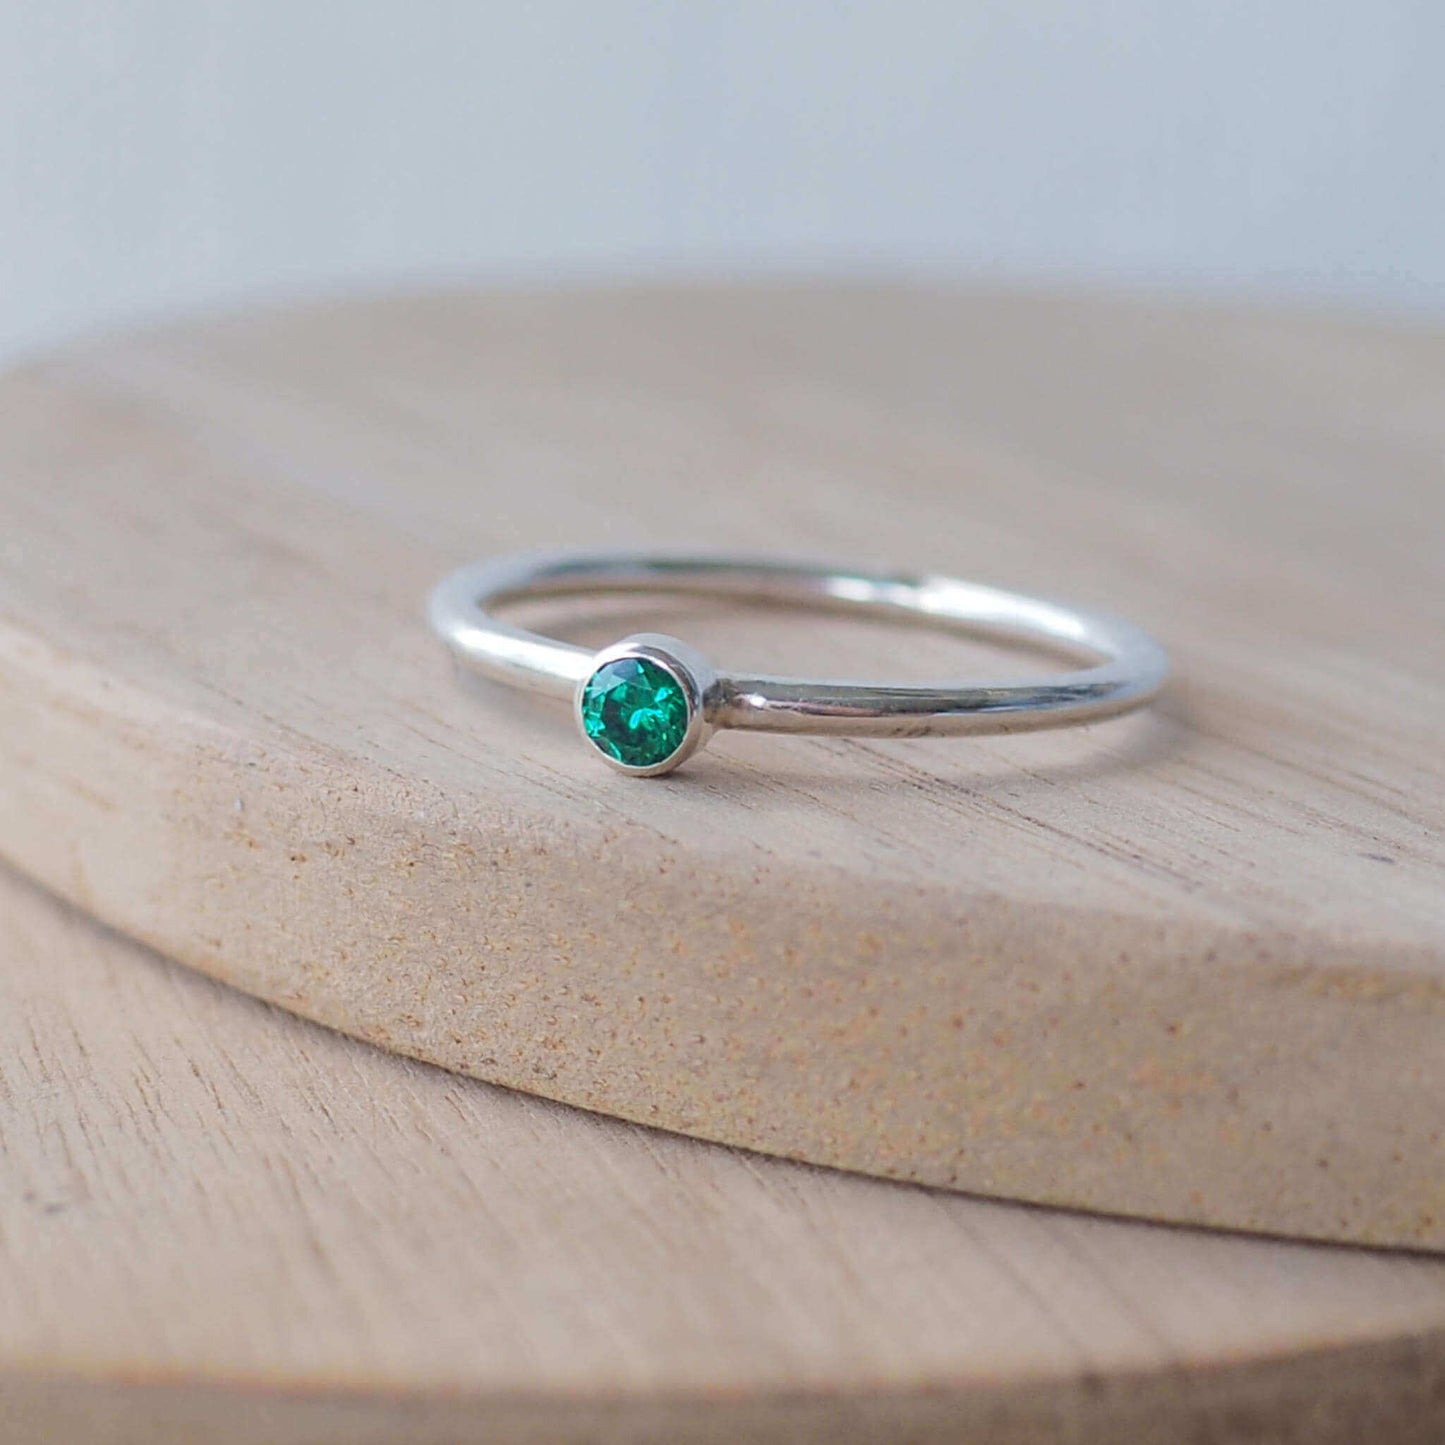 Silver ring with a Green gemstone. The ring is simple in style with no embellishment , with a round wire band 1.5mm thick with a simple Green Emerald 2mm round cubic zirconia stone set in an enclosed silver setting. The gem is very small and minimal on the band Emerald is birthstone for May. The ring is Sterling Silver and made to your ring size. Handmade in Scotland by Maram Jewellery